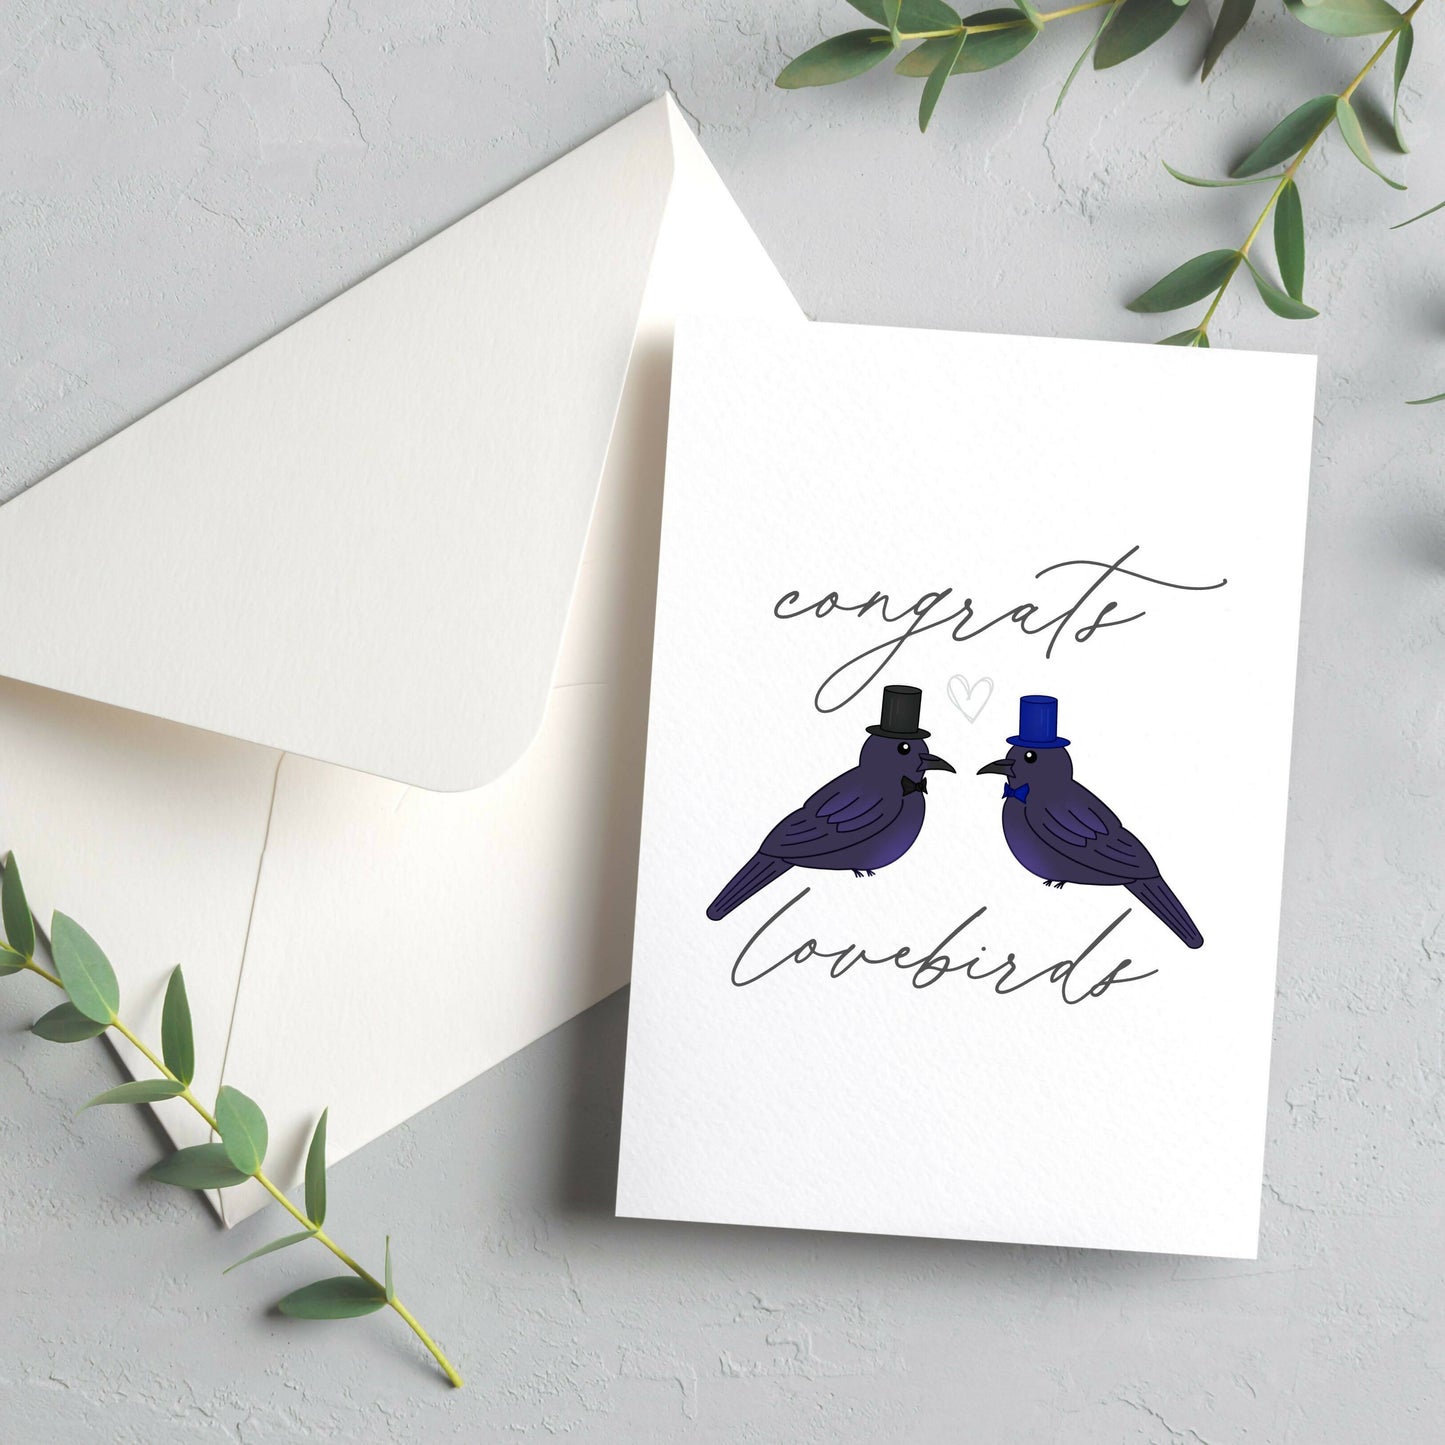 Load image into Gallery viewer, Congrats Lovebirds - Ravens Greeting Card
